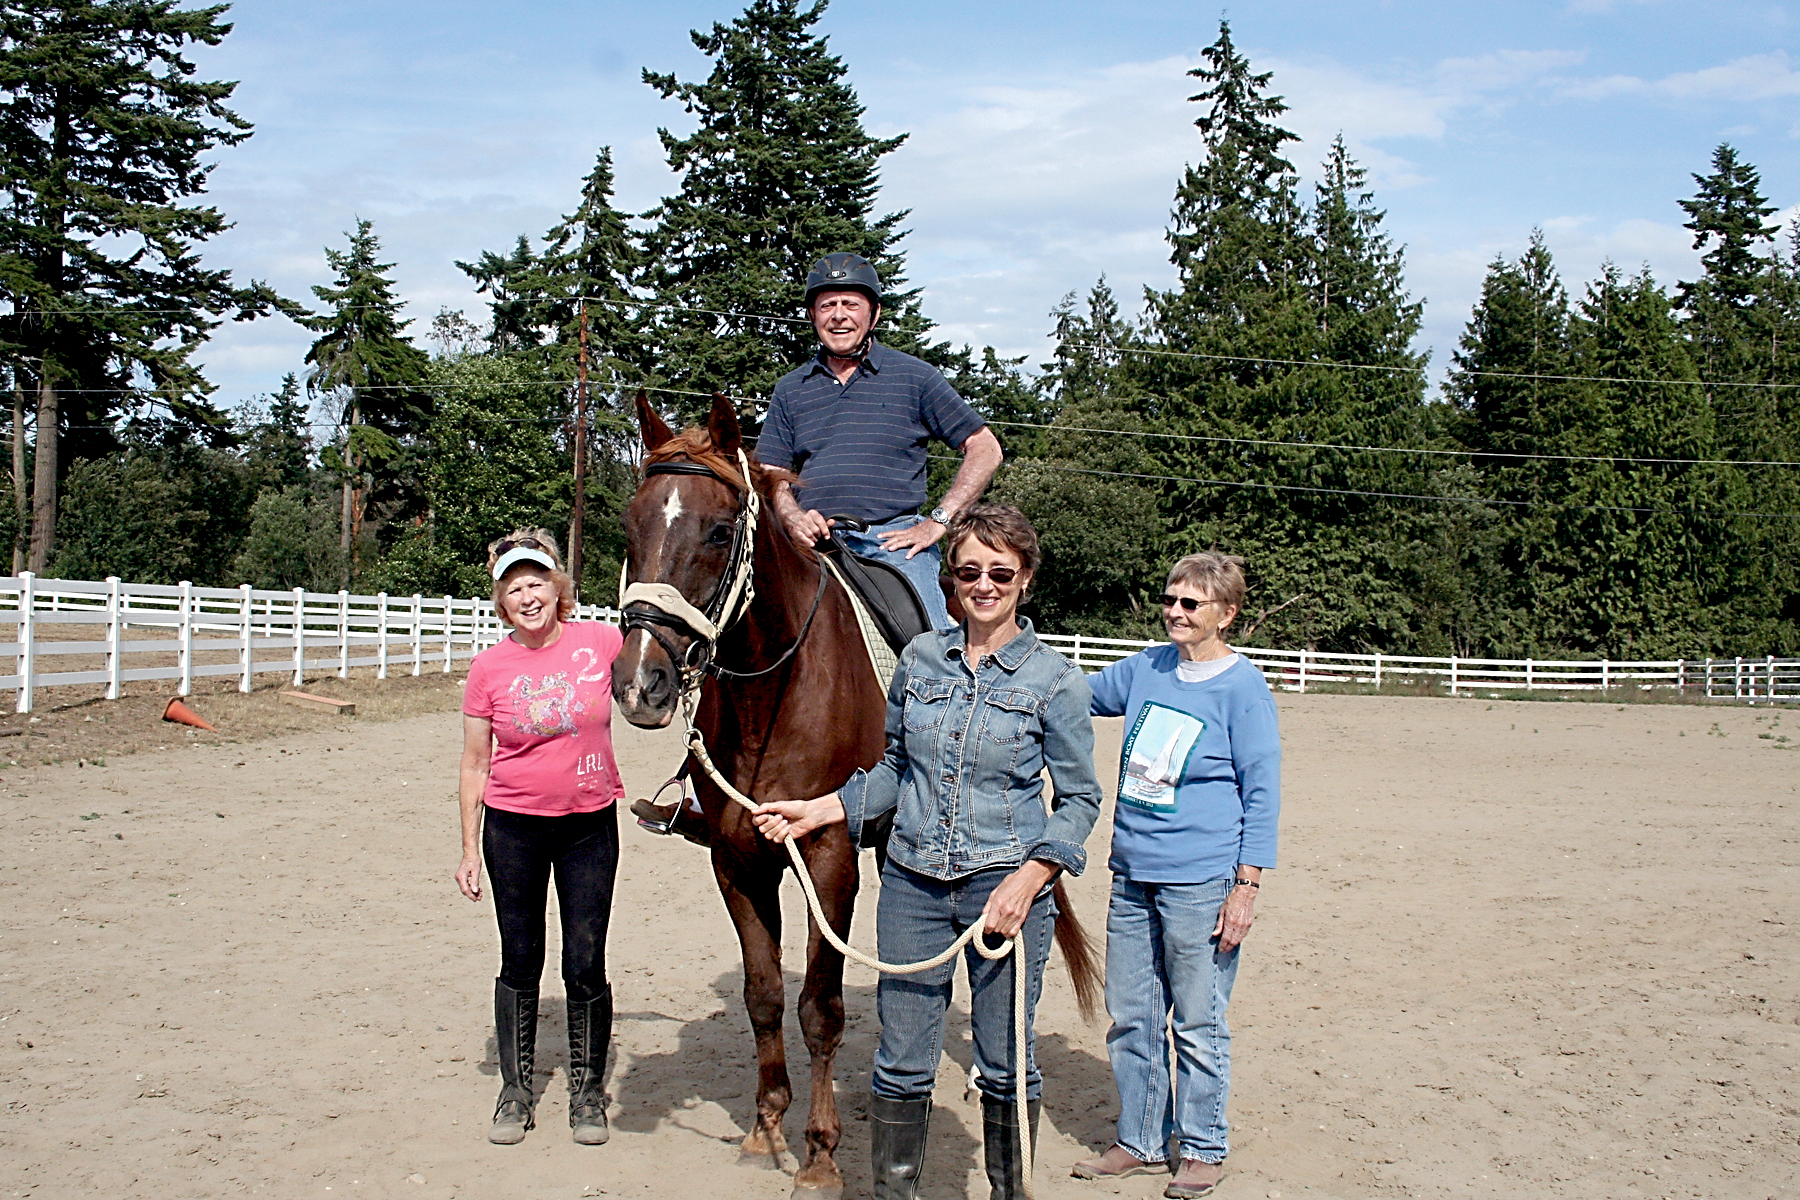 Professional Association of Therapeutic Horsemanship-certified instructor Mary Craft-Nepute